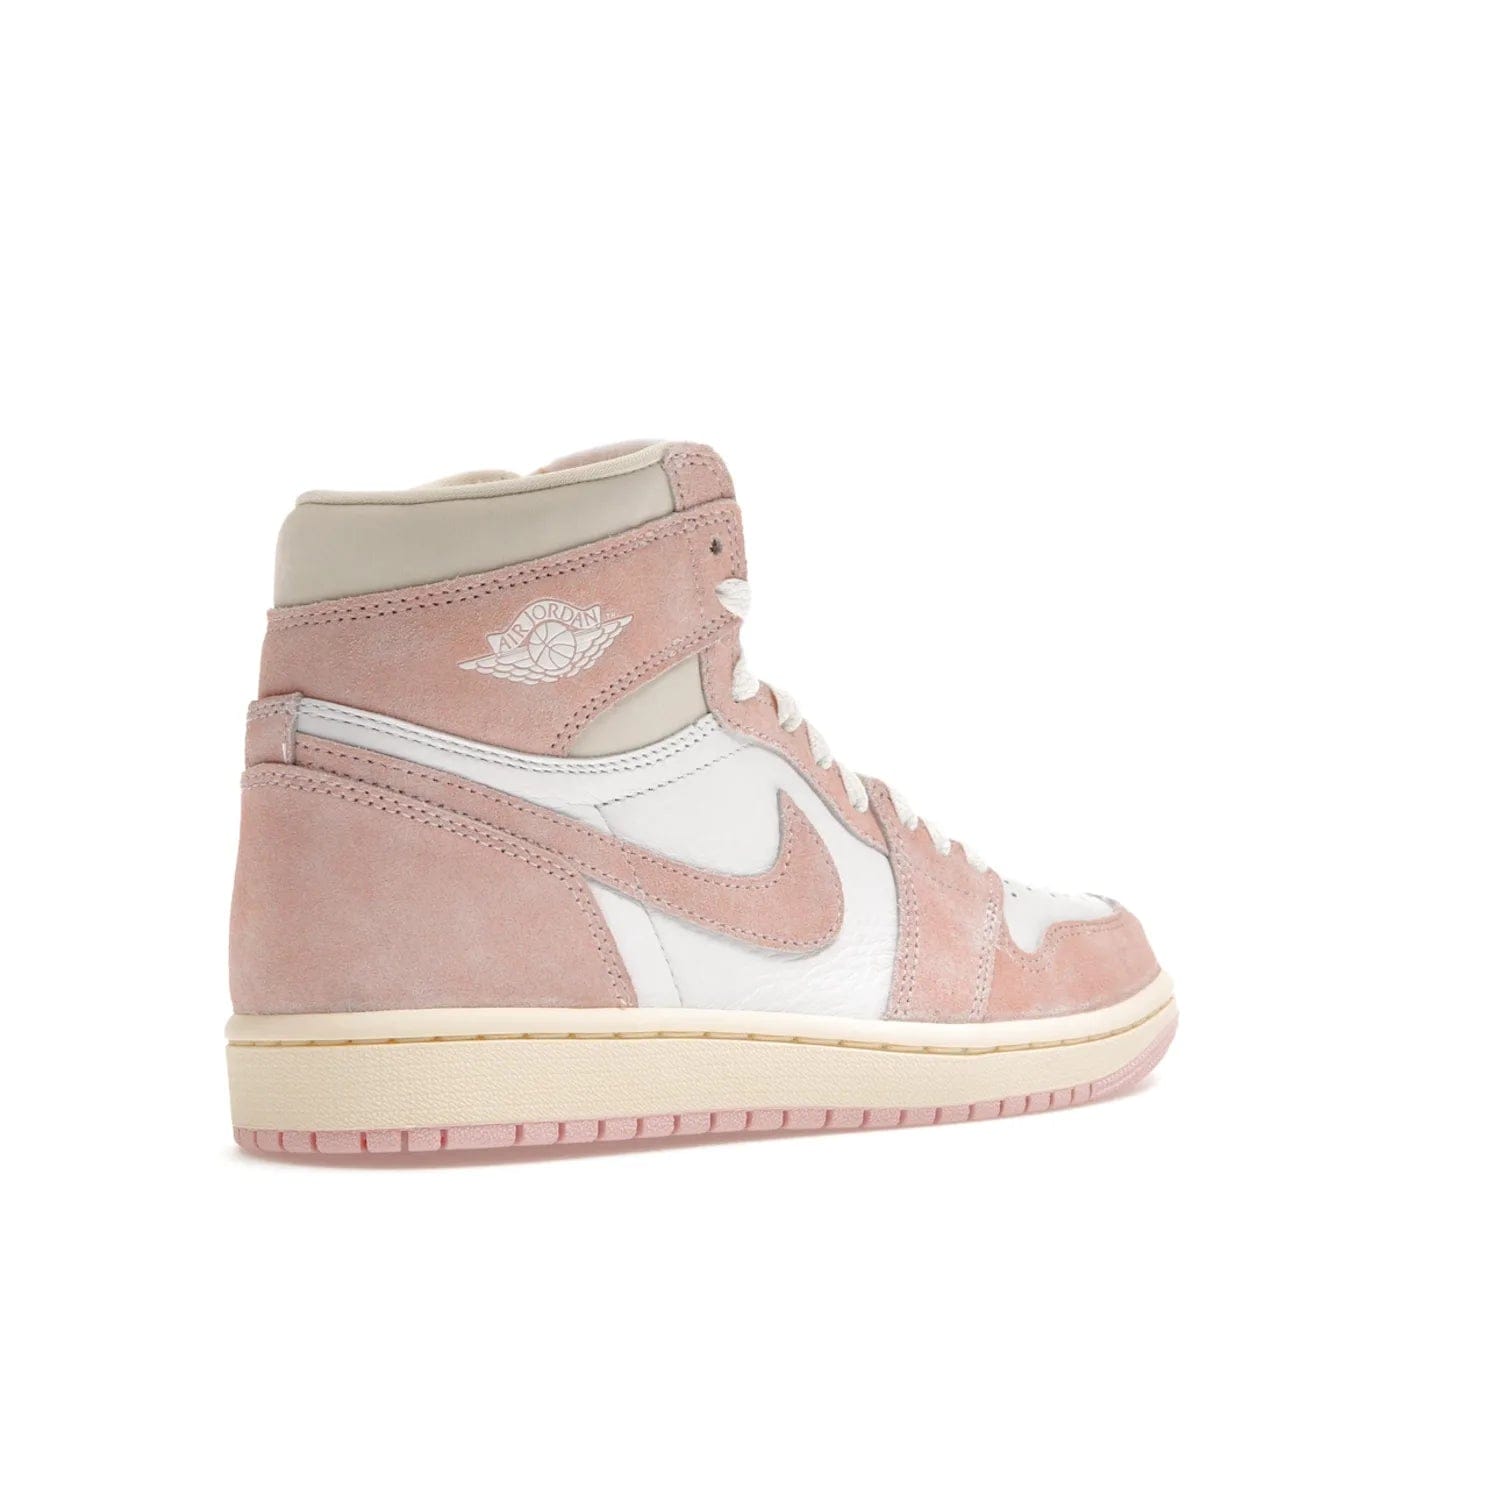 Jordan 1 Retro High OG Washed Pink (Women's) - Image 33 - Only at www.BallersClubKickz.com - Iconic Air Jordan 1 Retro High OG for women with unique pink suede and white leather uppers. Get the timeless look on April 22, 2023.